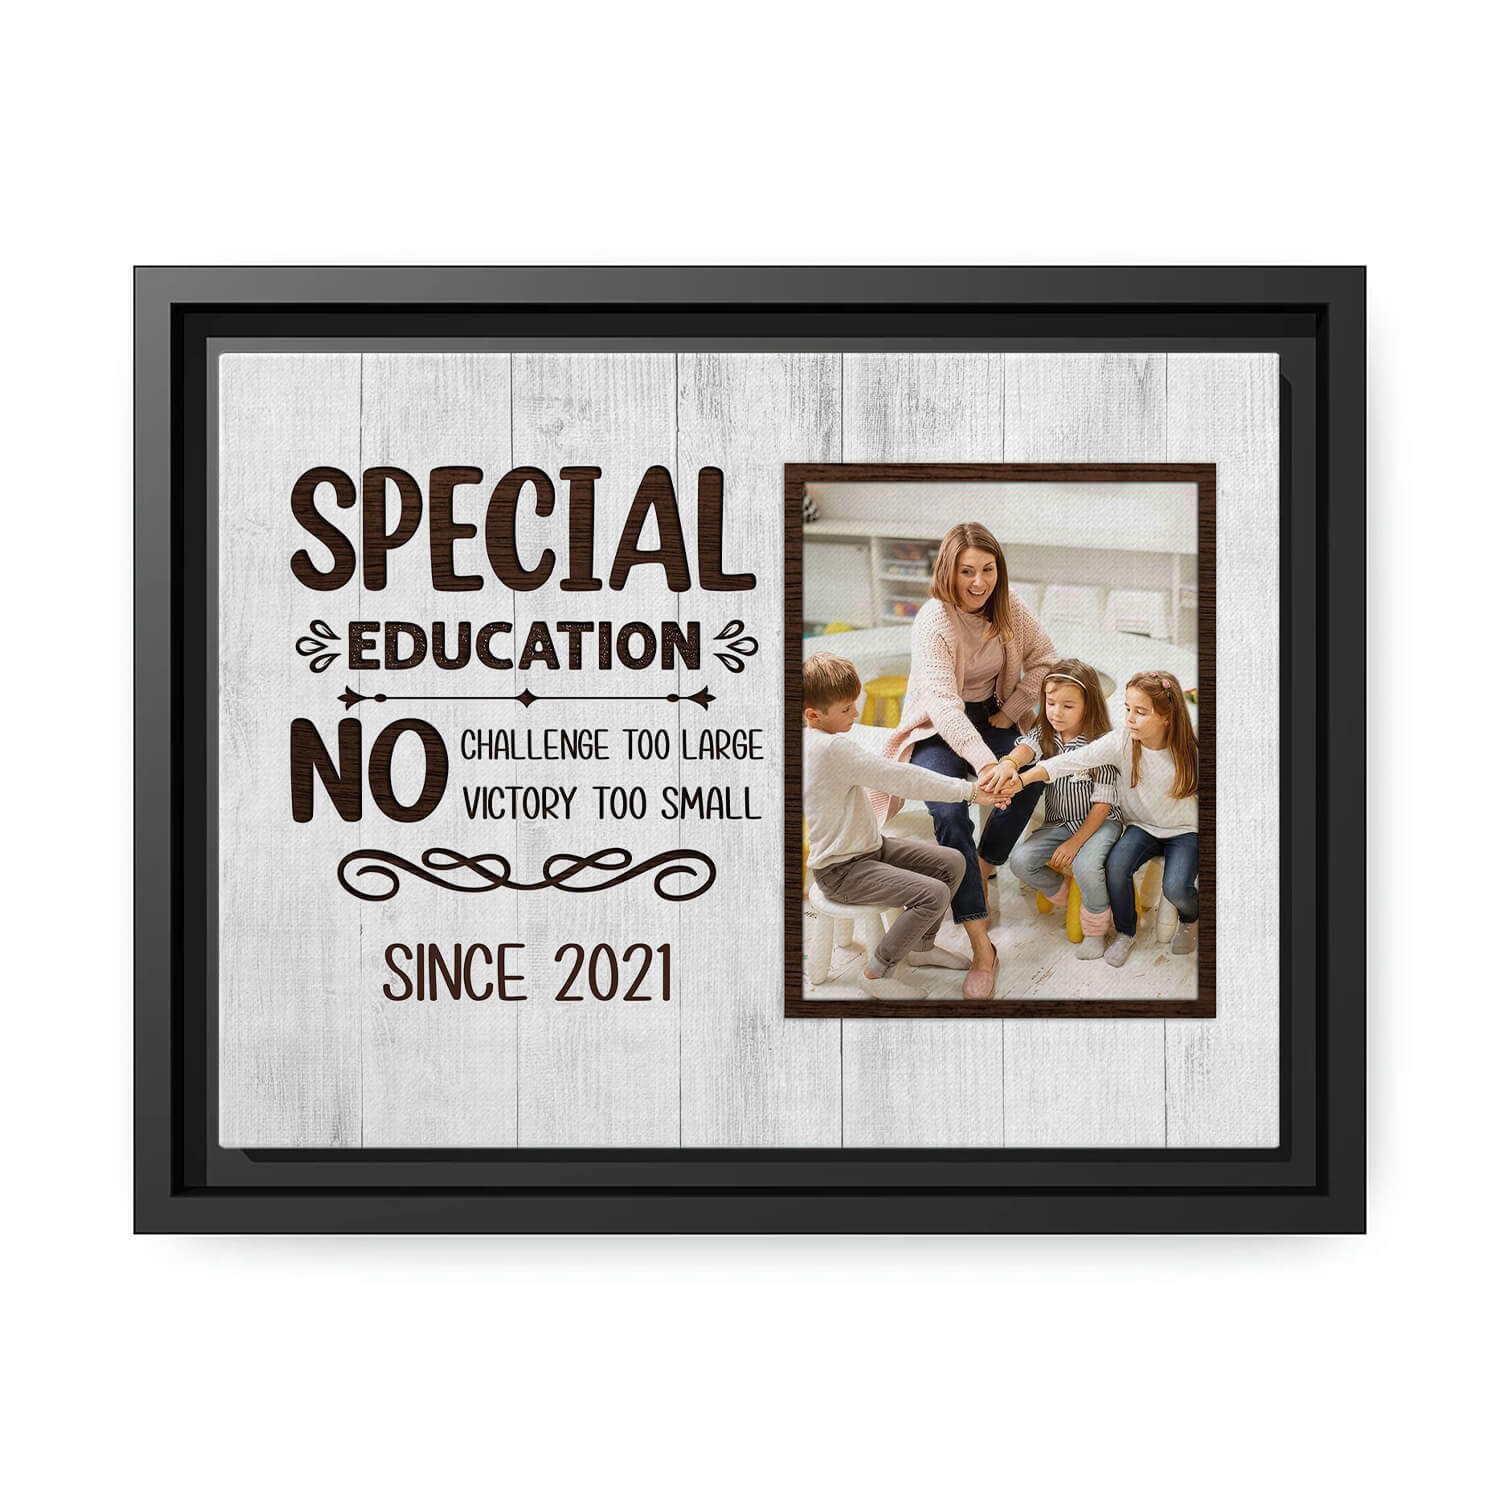 Special Education - Personalized Teacher's Day, Birthday or Christmas gift For Special Education Teacher - Custom Canvas Print - MyMindfulGifts